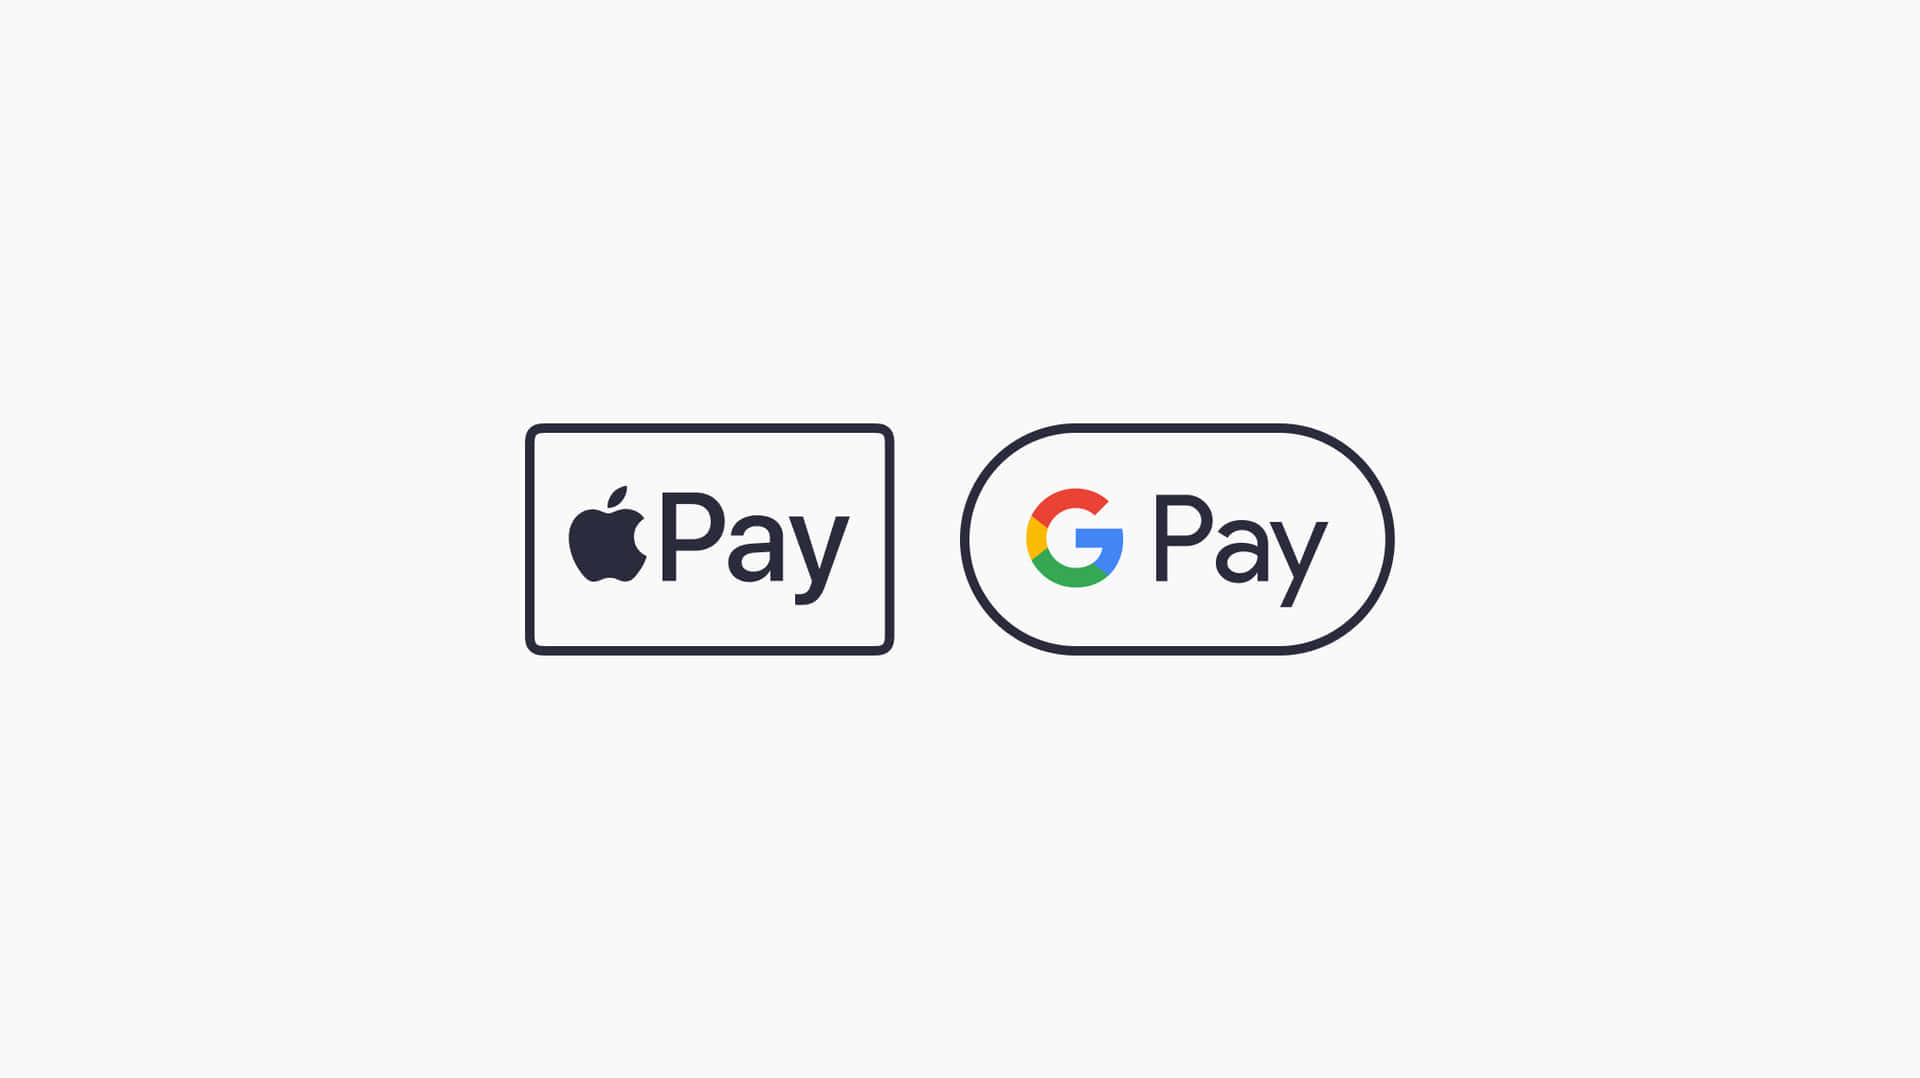 Apple Pay - the revolutionary payment system